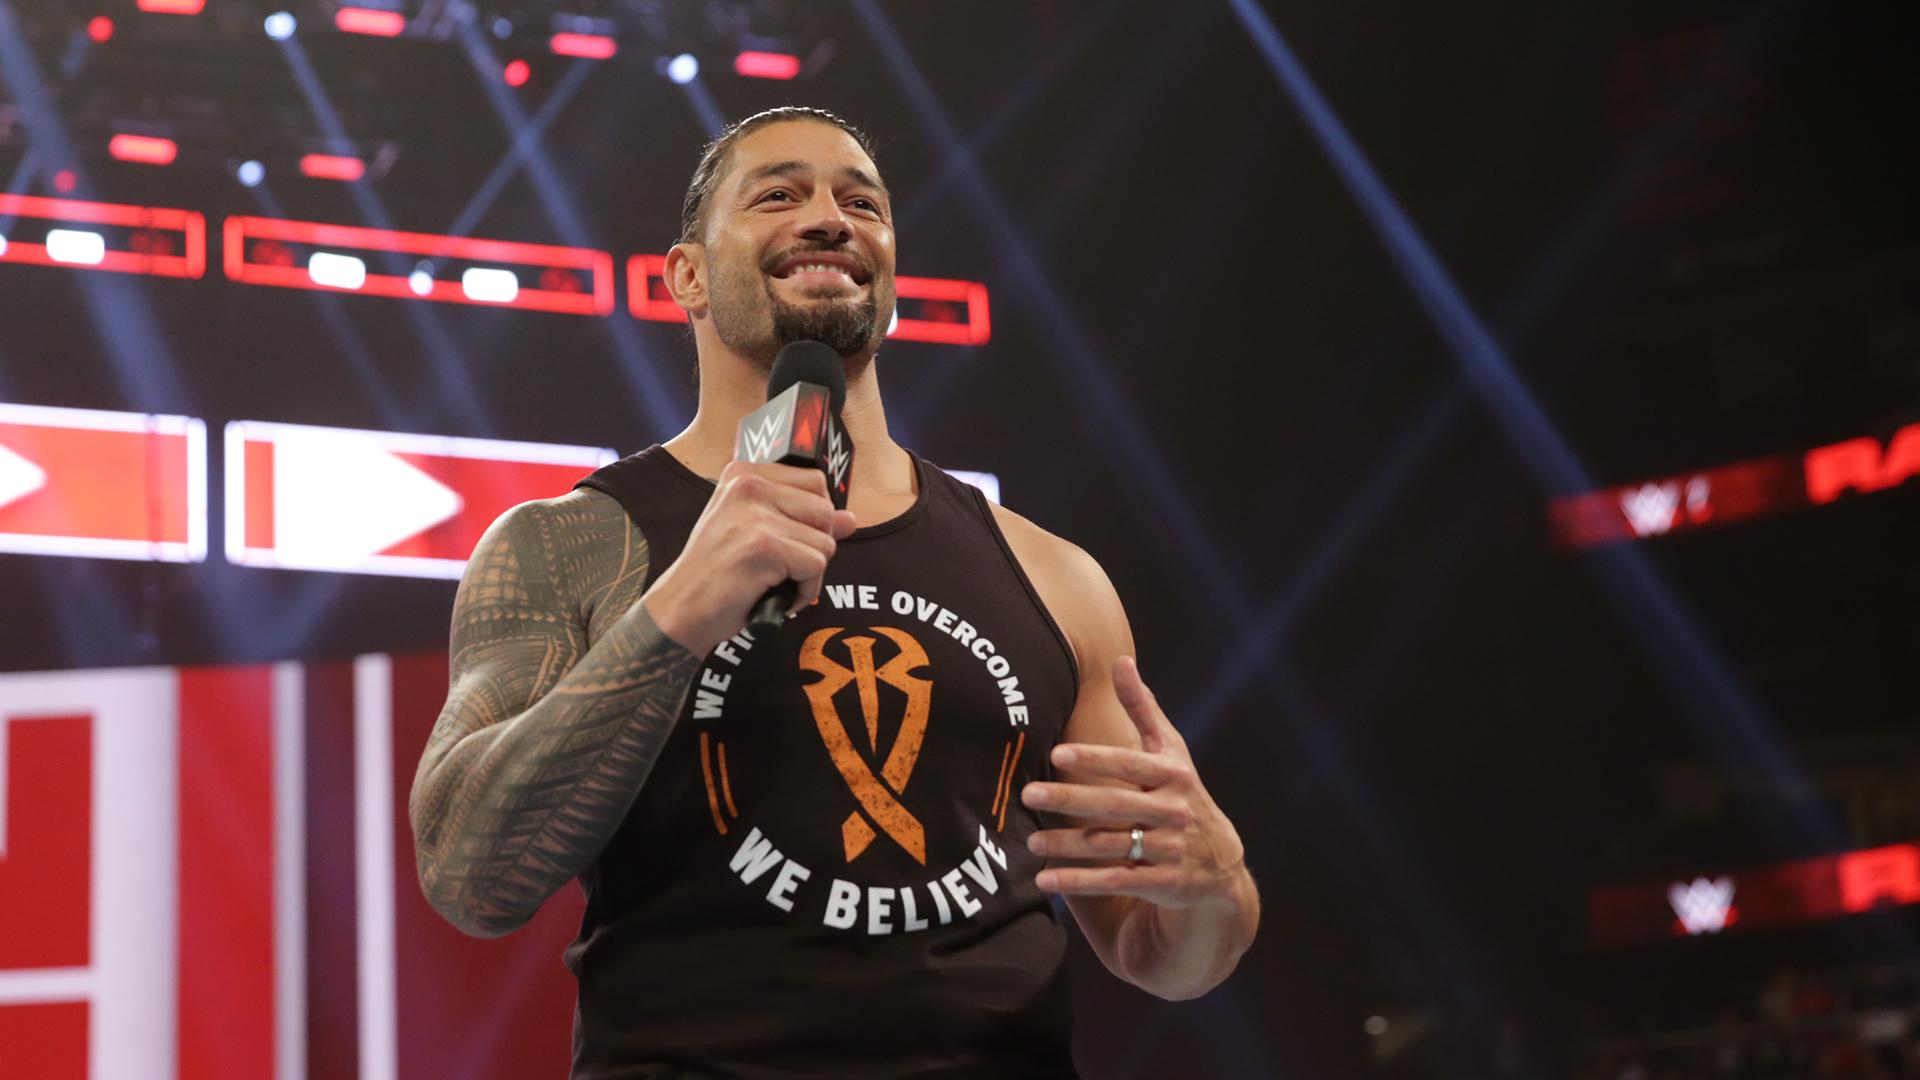 Returning Roman Reigns announces his leukemia is in remission. Big